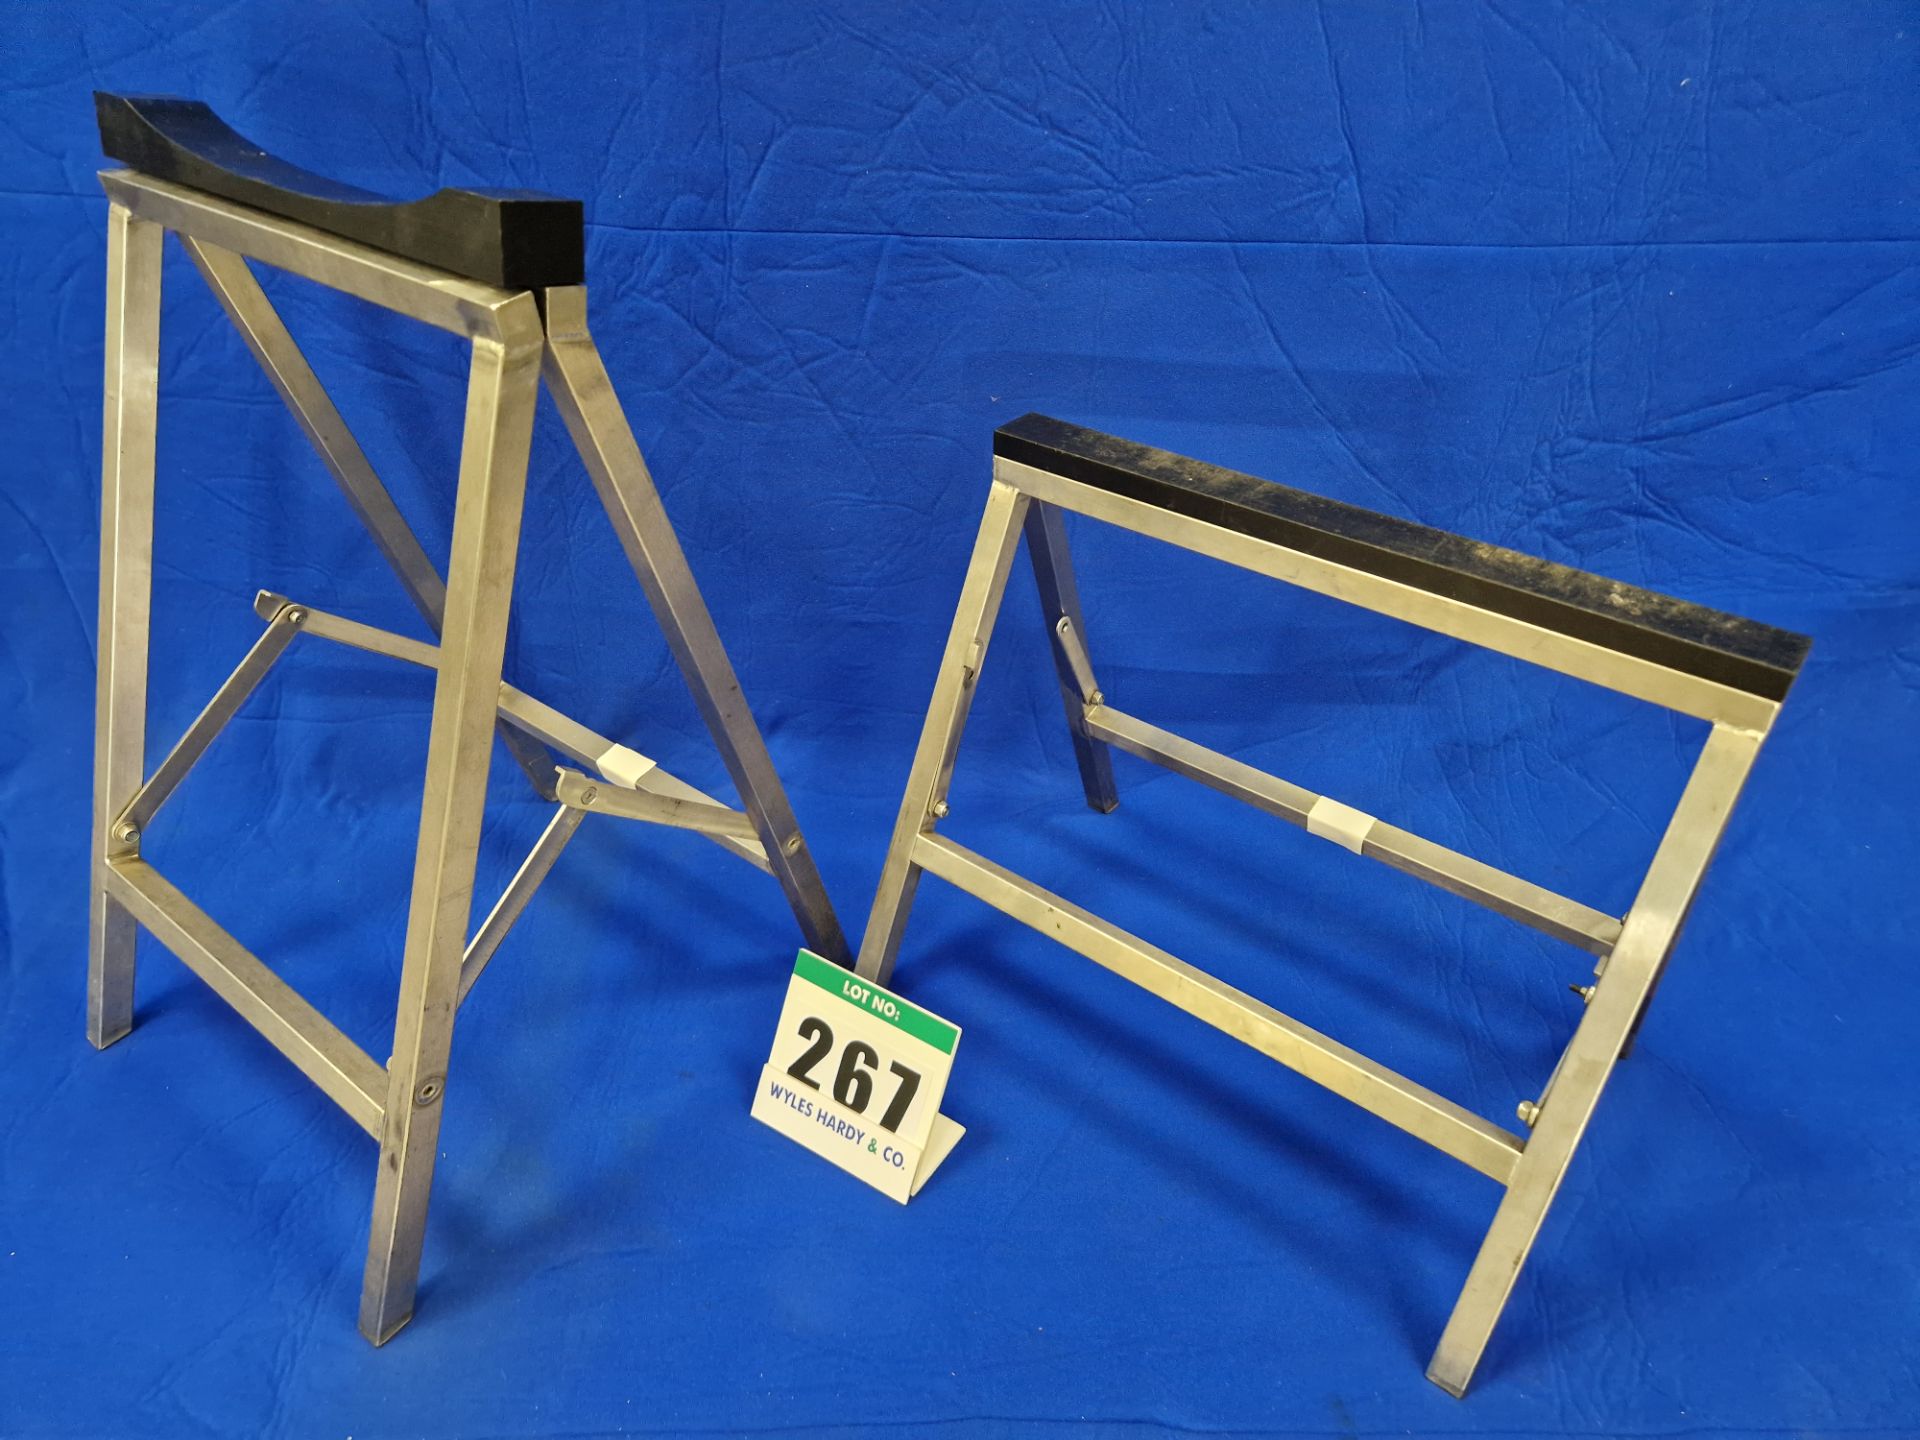 One Pair of Folding Stainless Steel Open Wheel Race Car Stands (Front and Rear)